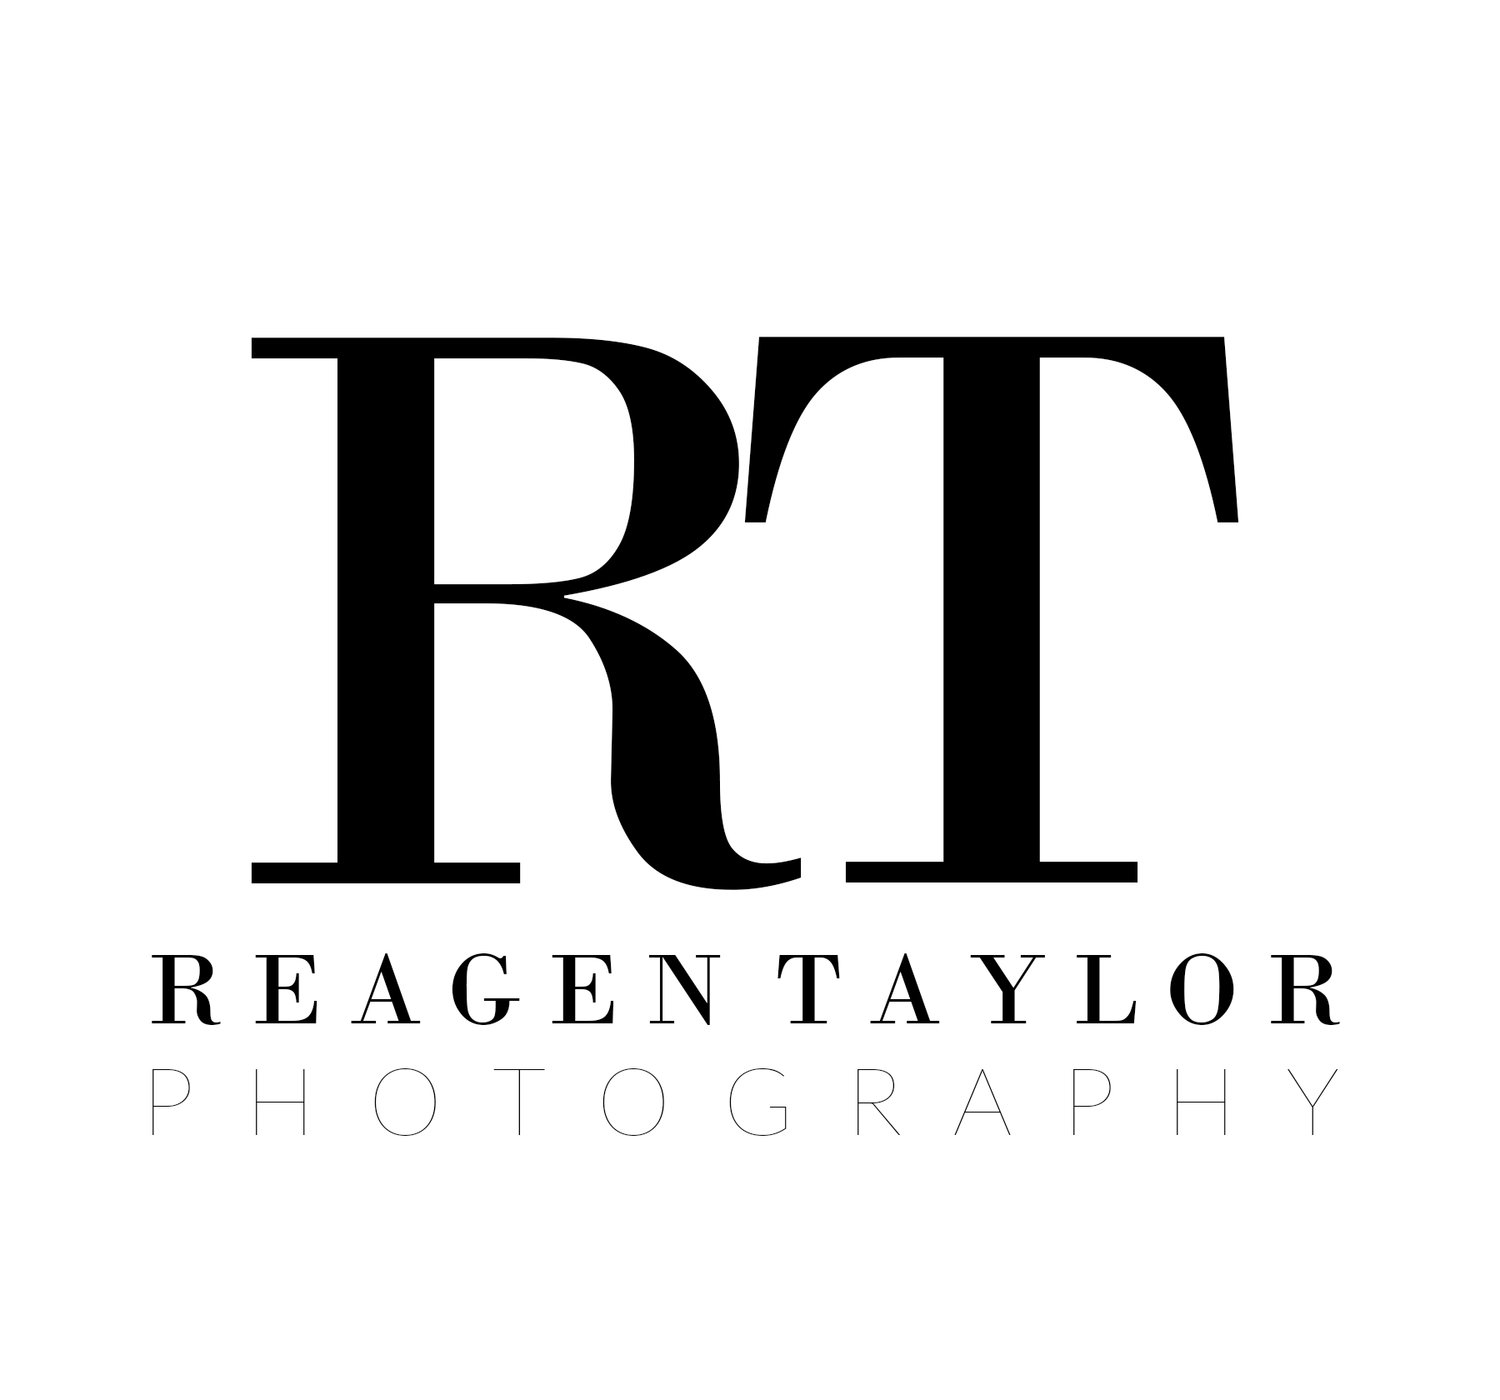 Reagen Taylor Photography